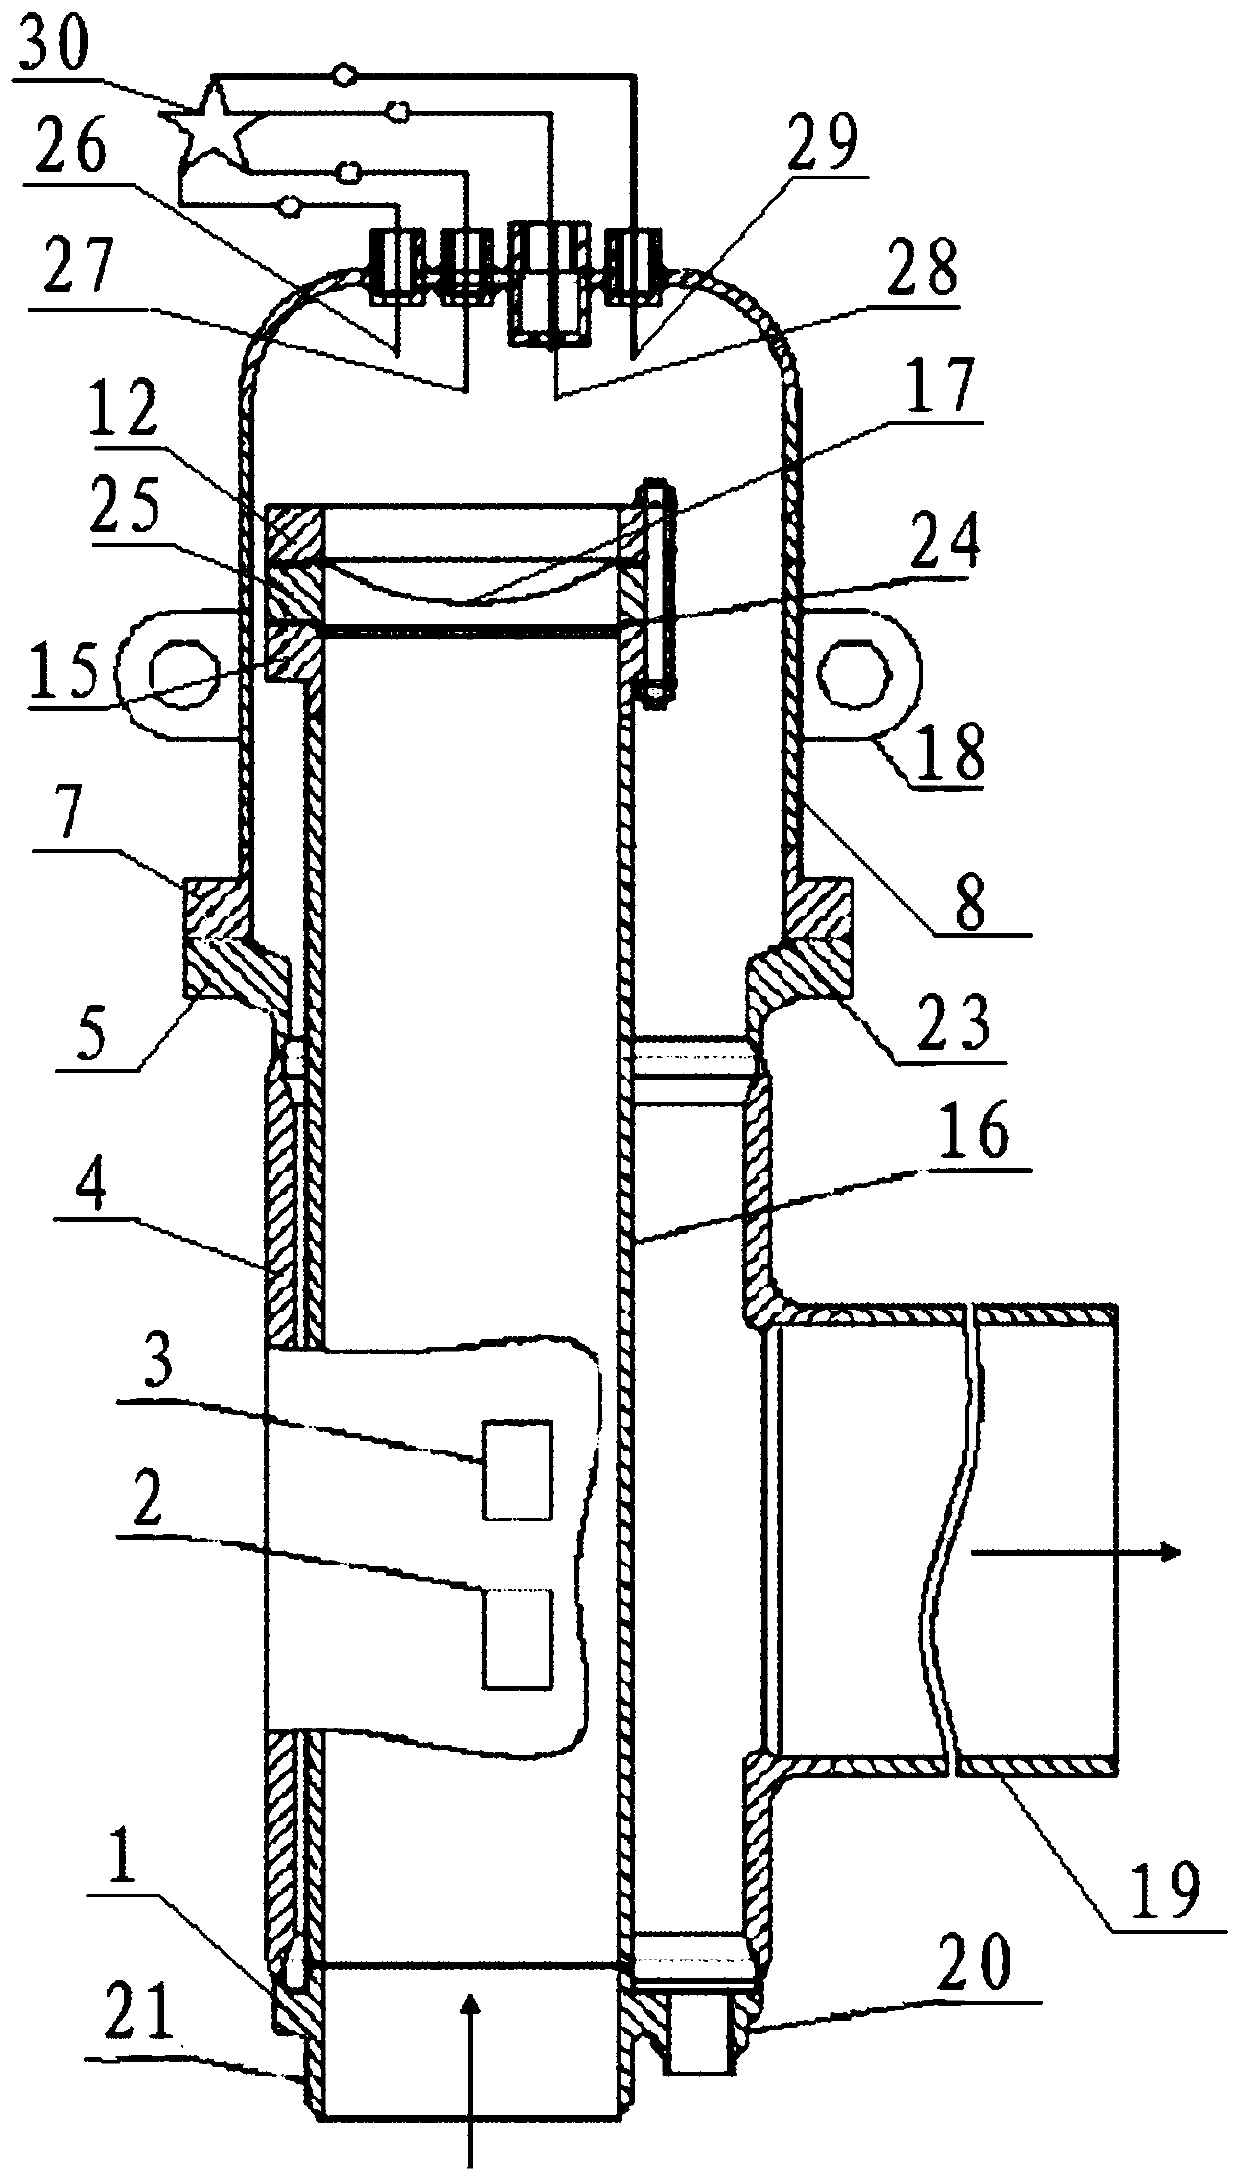 Rupture disk protection device with alarming function